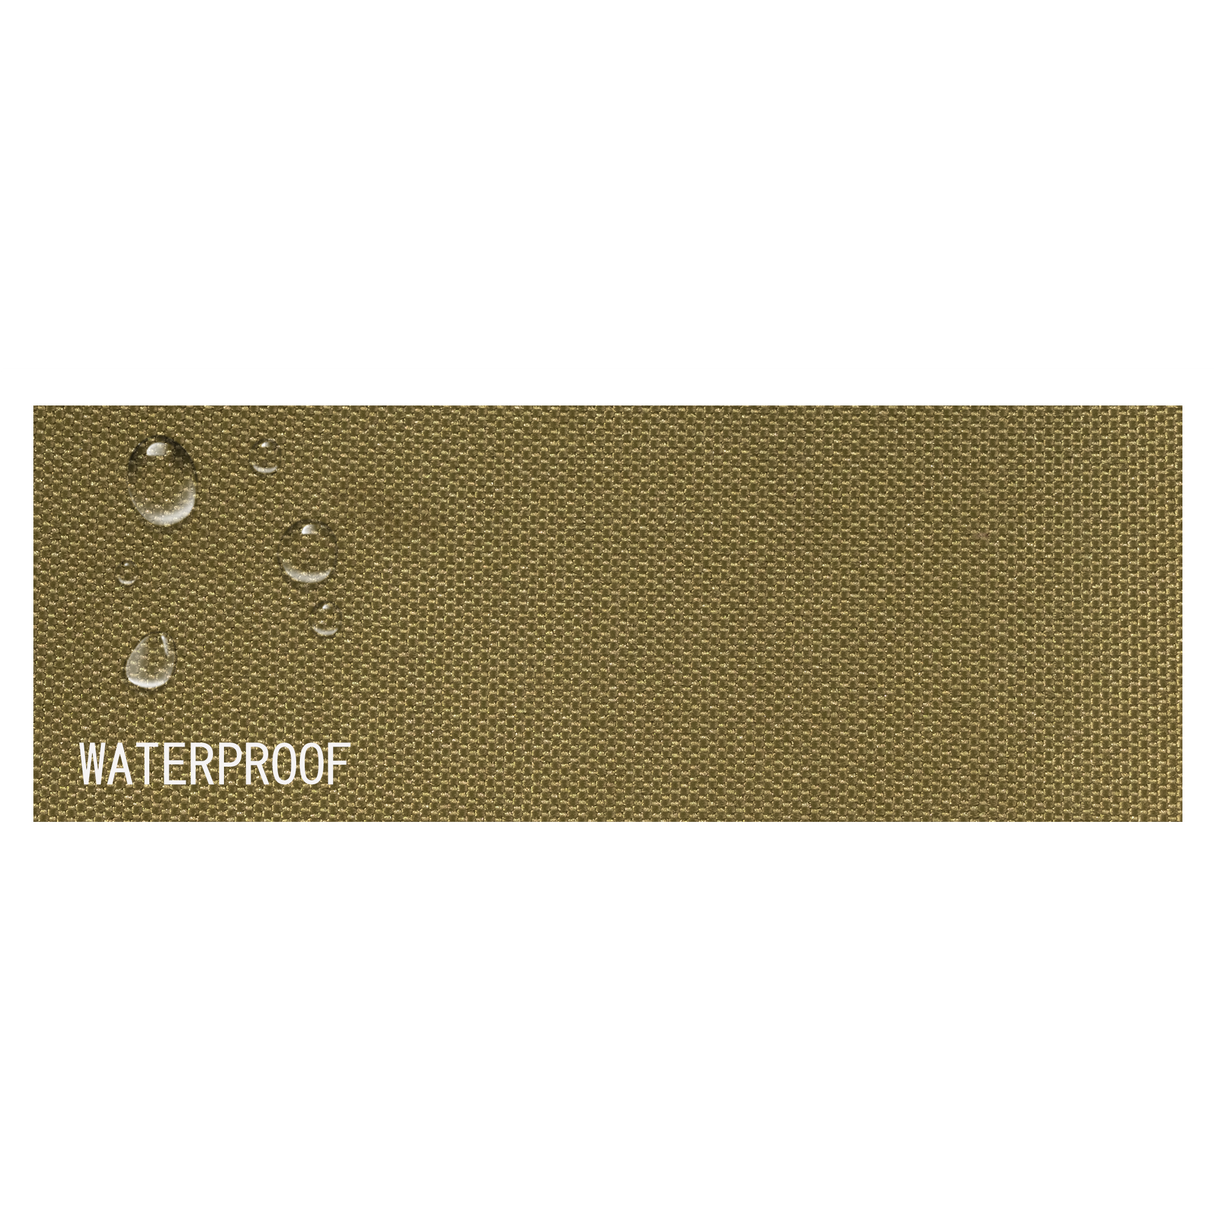 GEX Waterproof Oxford Custom Size Bench Cushion Pads 70D High-Resilience Foam